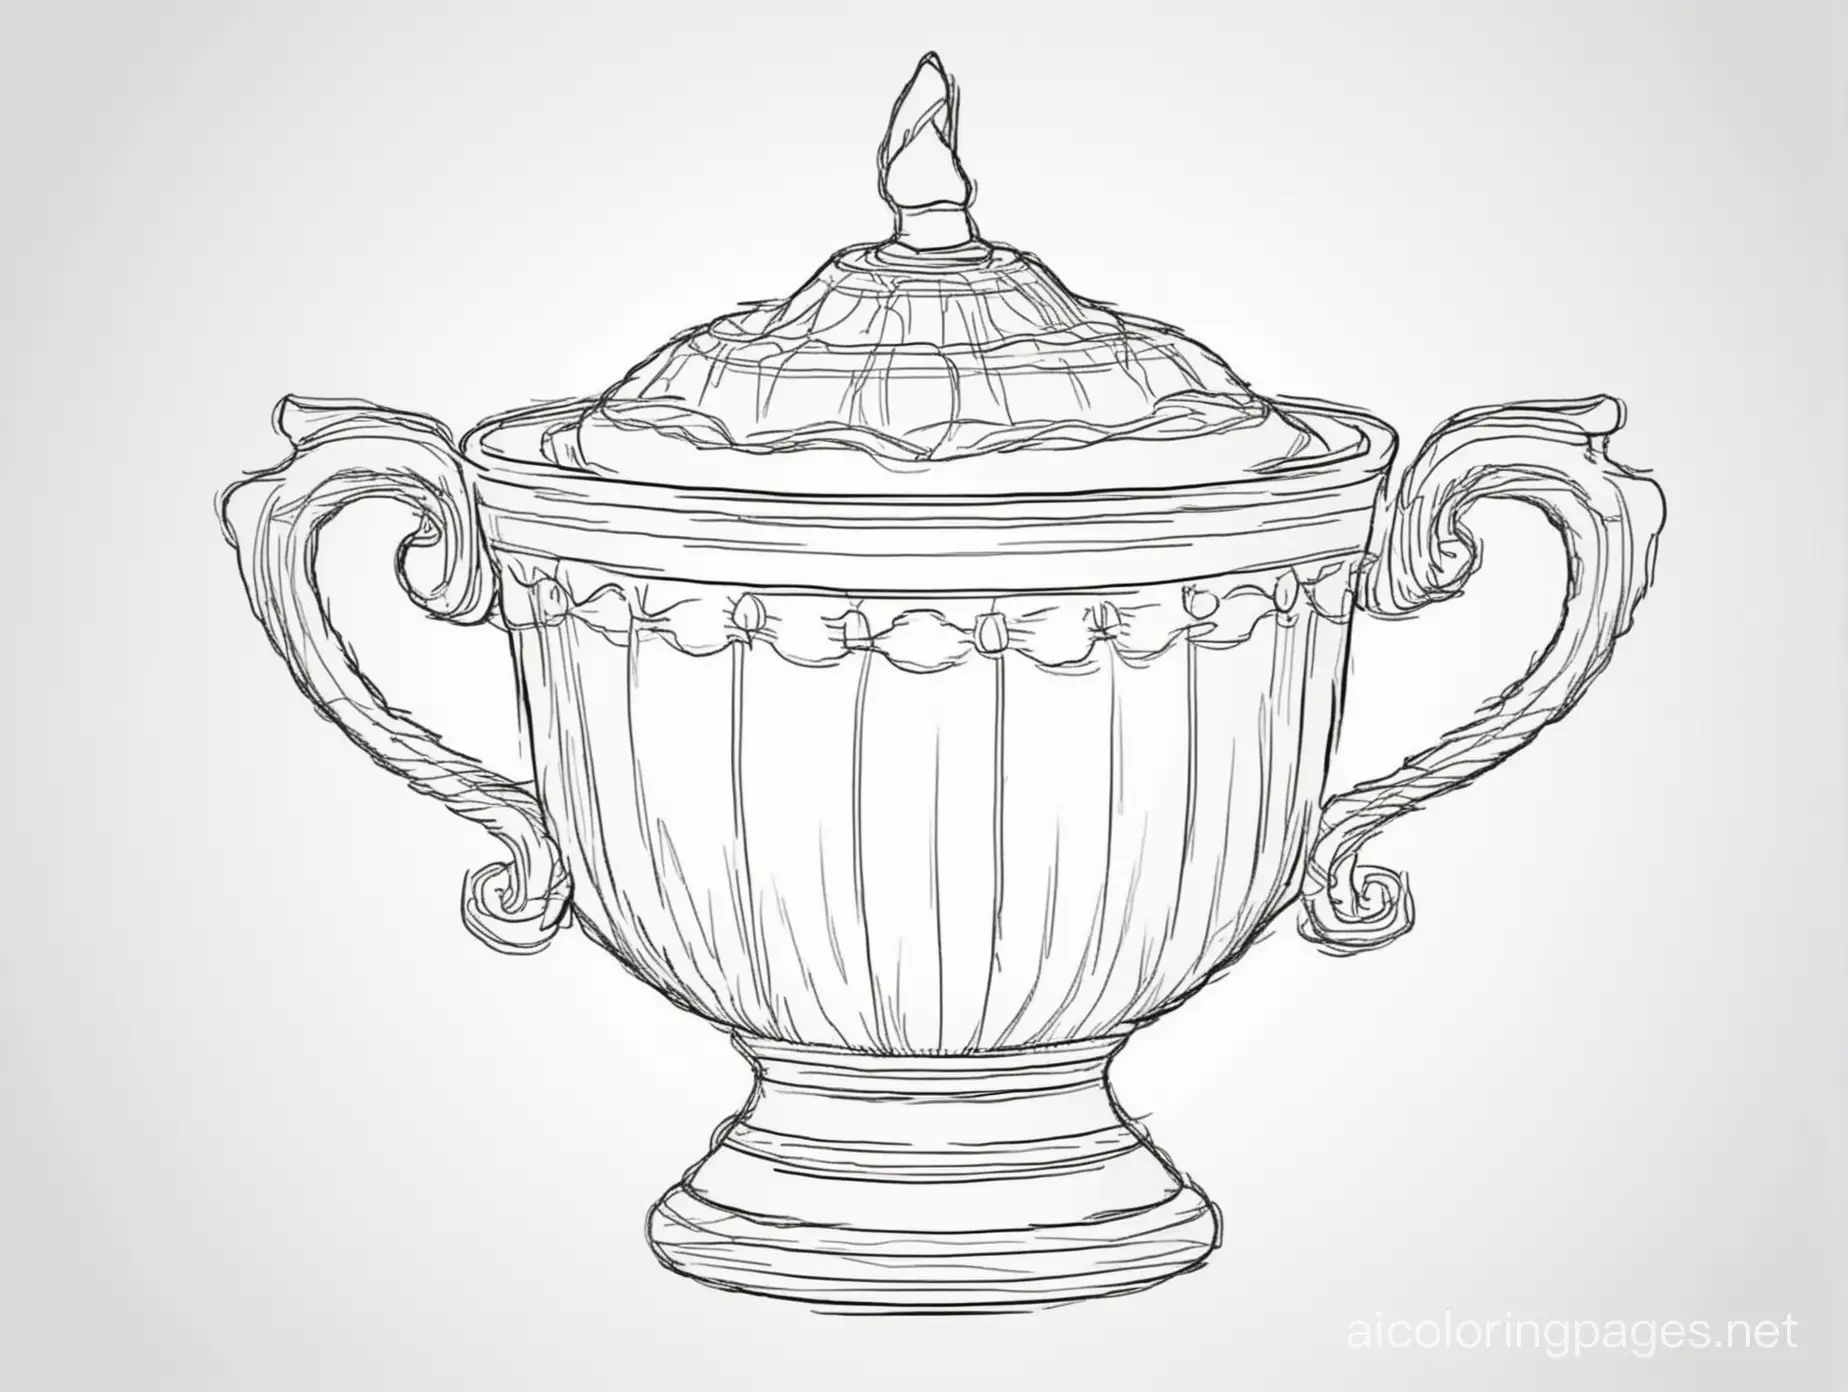 gold cup, Coloring Page, black and white, line art, white background, Simplicity, Ample White Space. The background of the coloring page is plain white to make it easy for young children to color within the lines. The outlines of all the subjects are easy to distinguish, making it simple for kids to color without too much difficulty